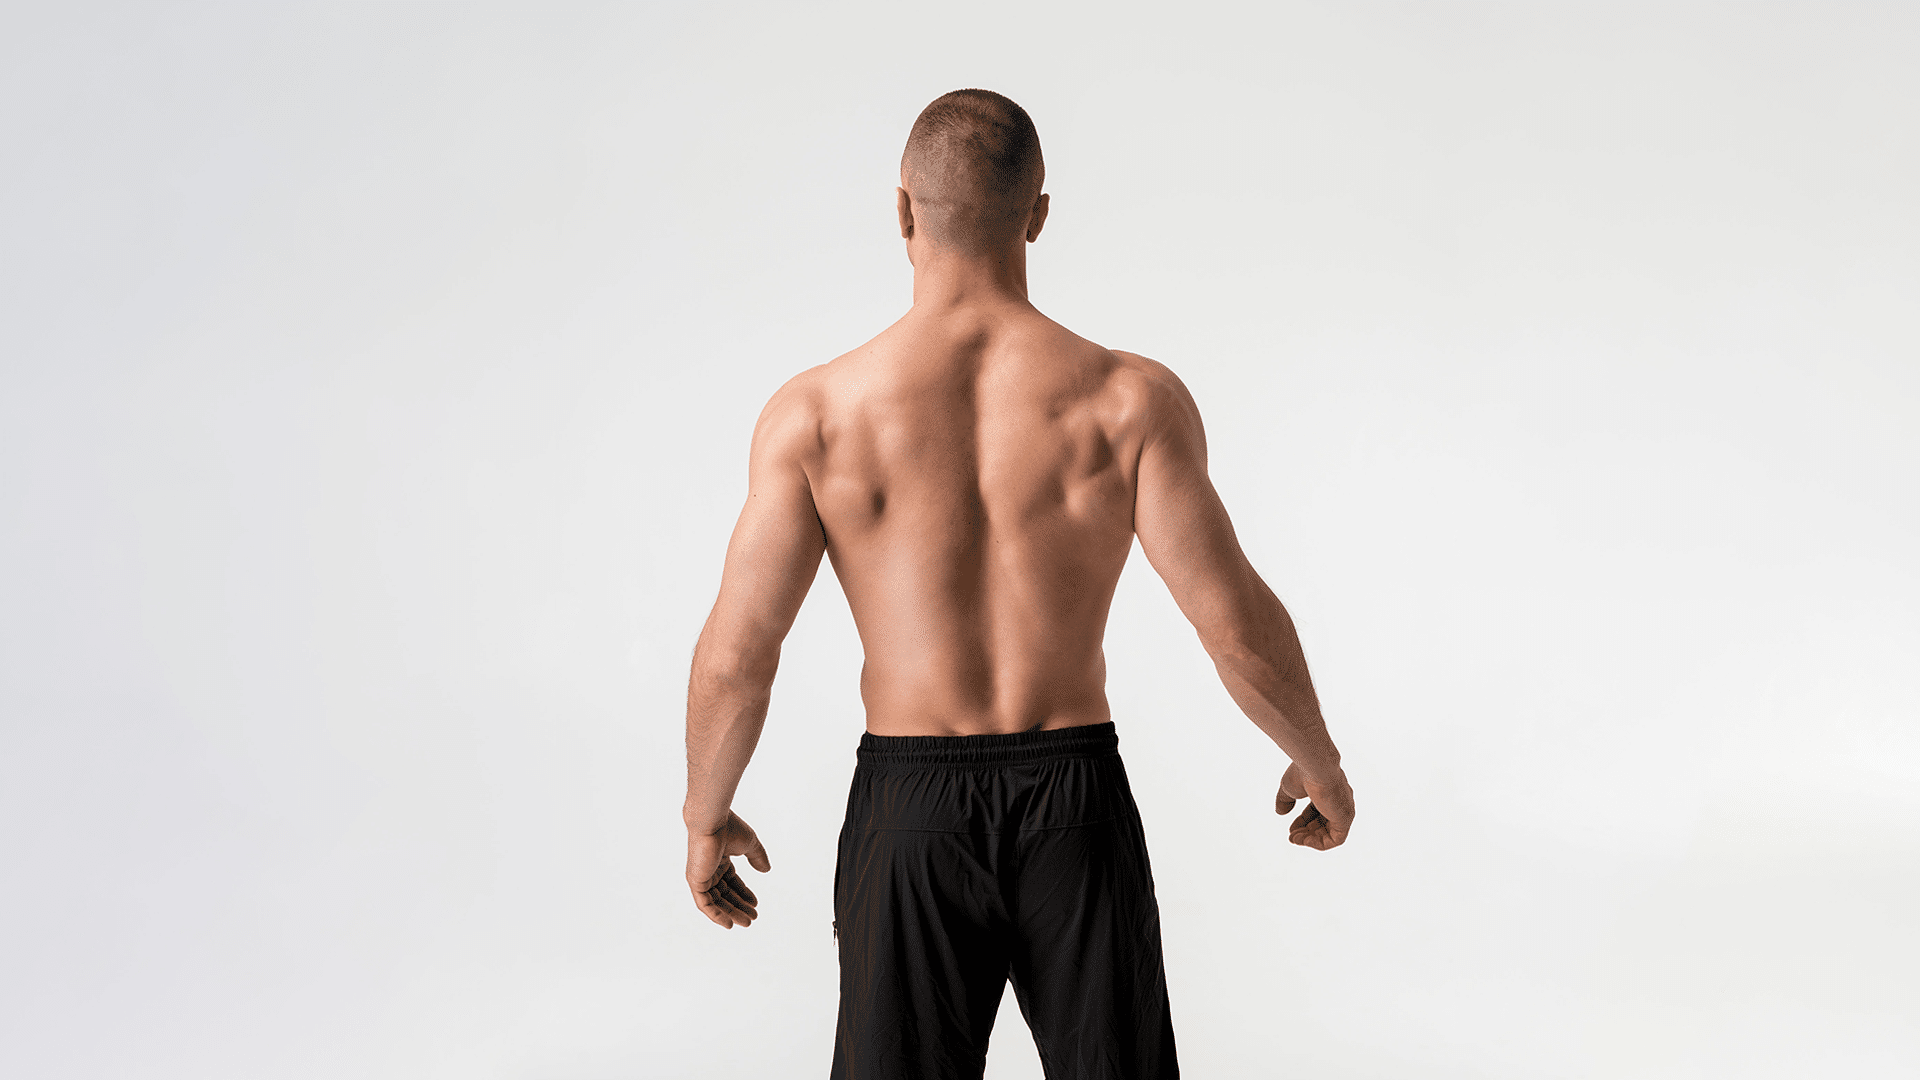 Strong Back Workout To Build A Muscular Frame - BetterMe